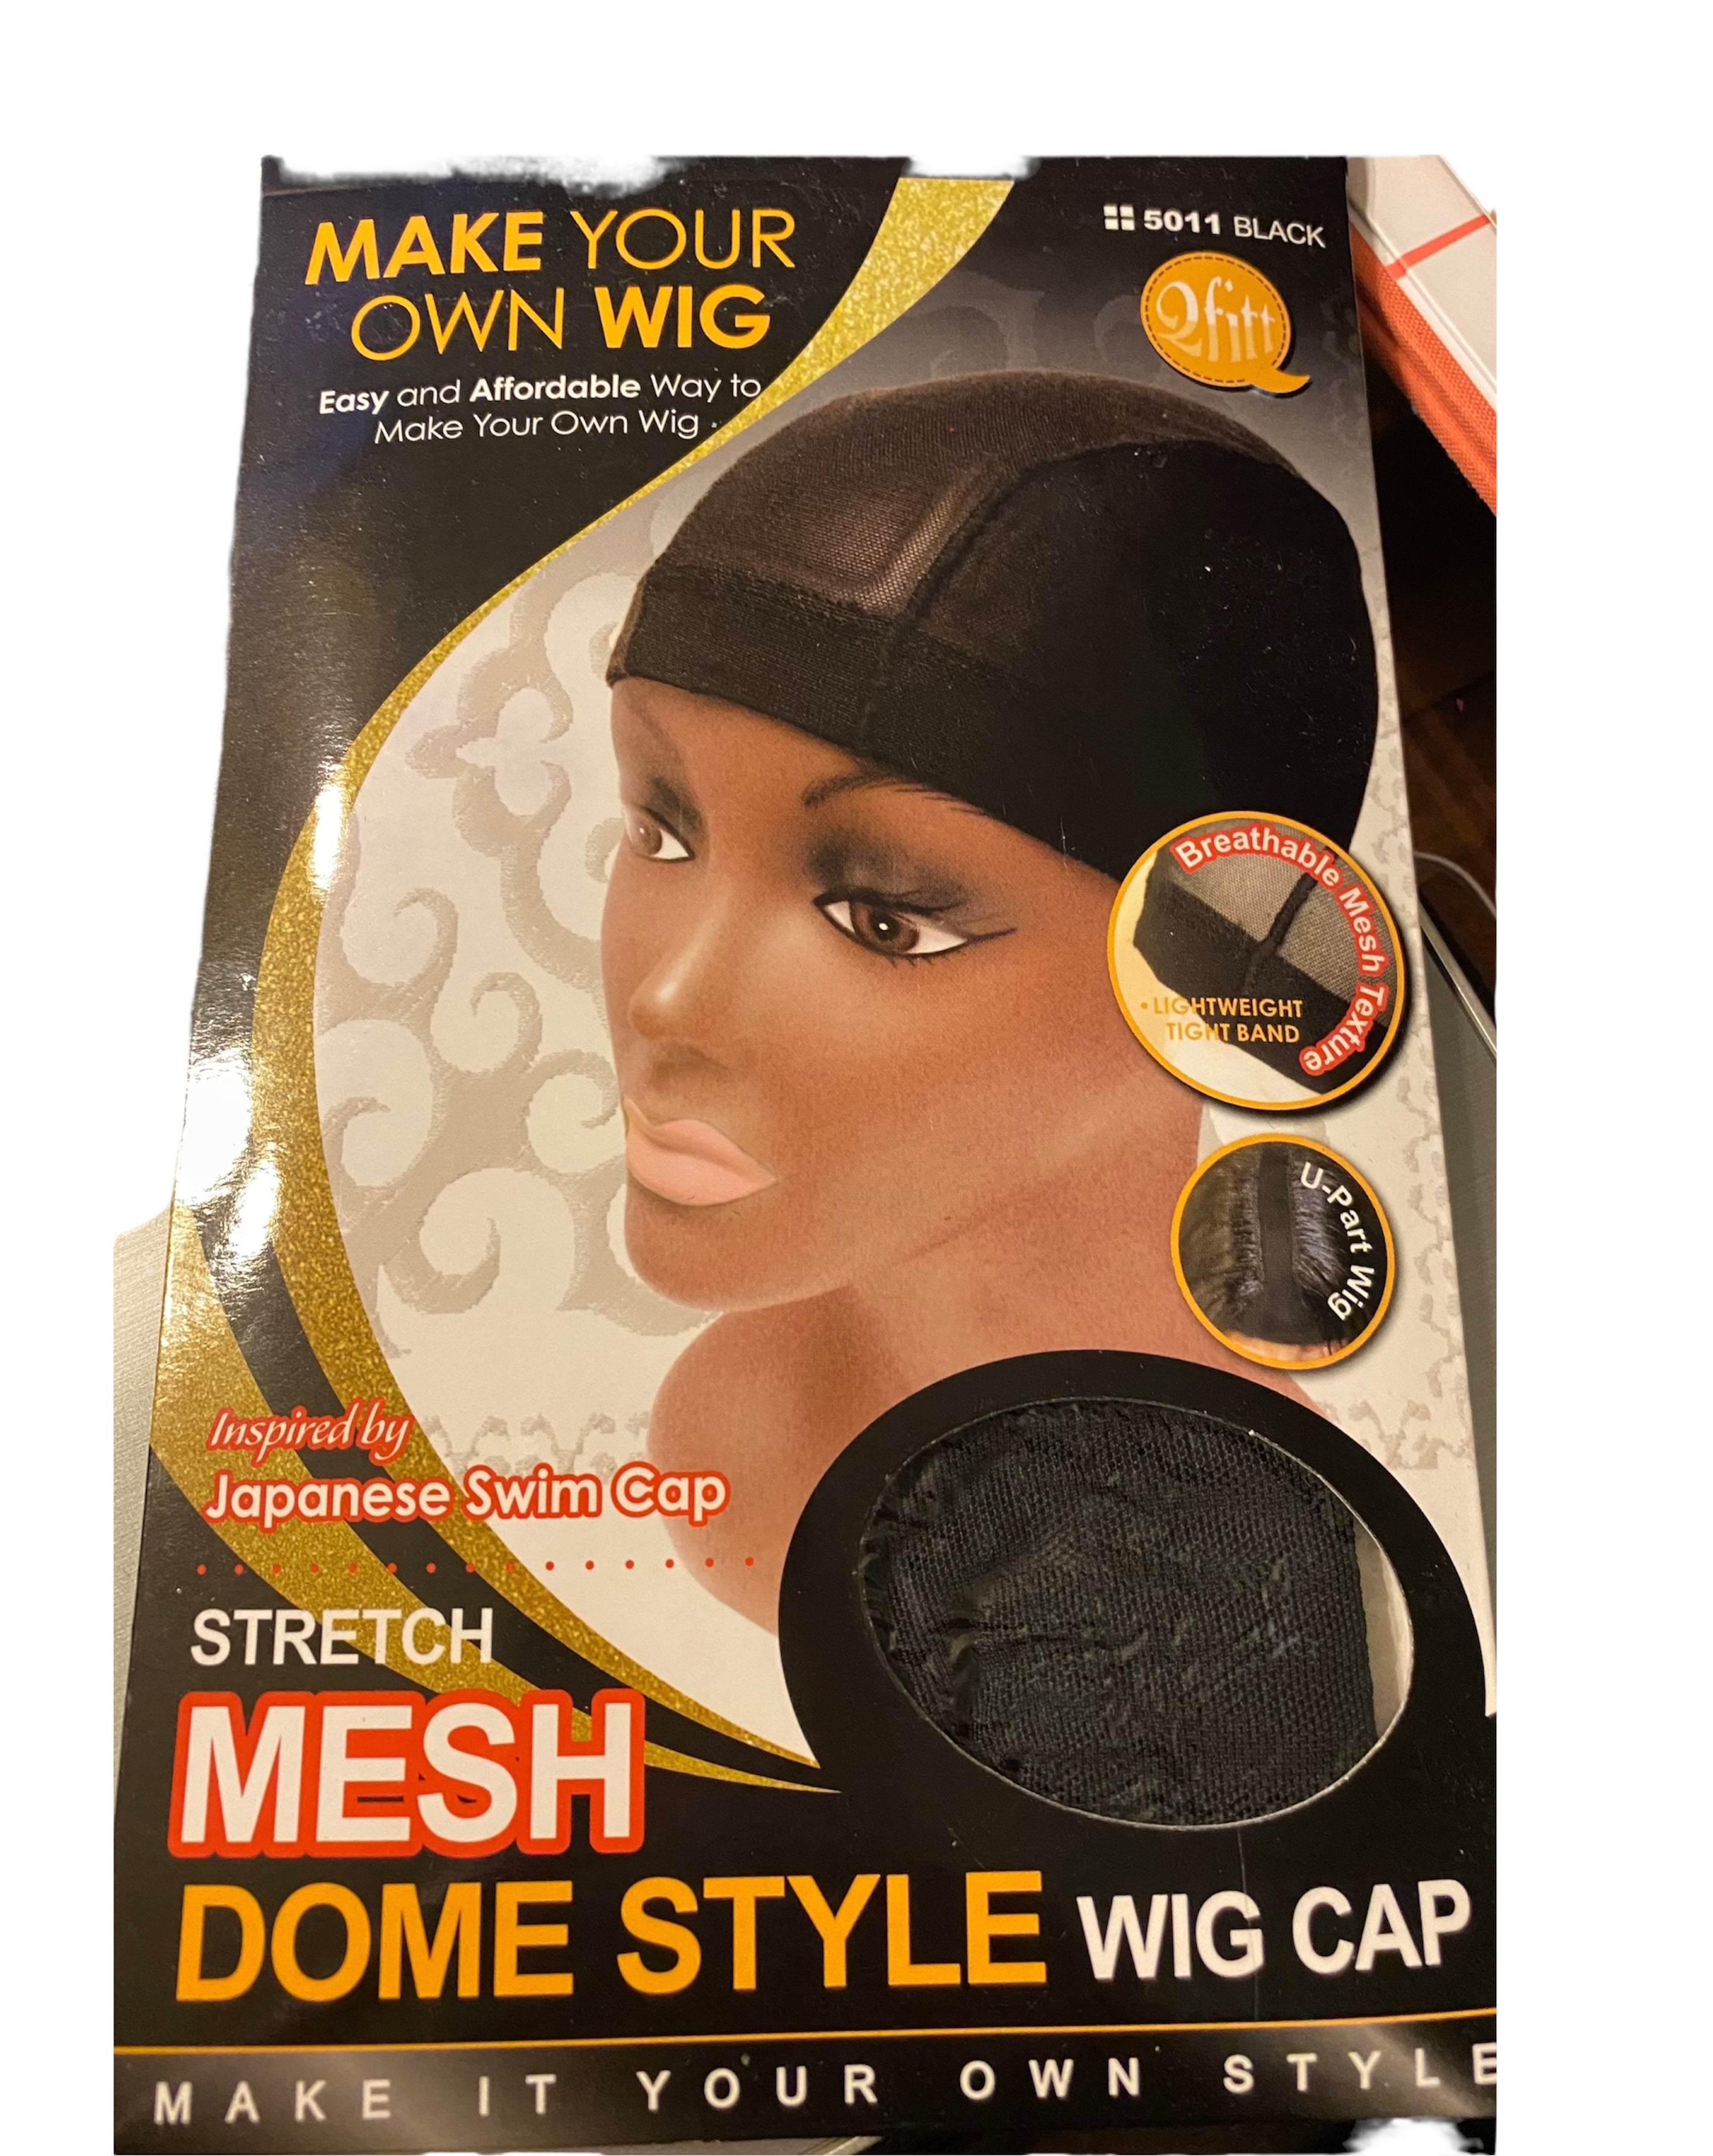 Dome Mesh Wig Cap, Make Your Own Wig